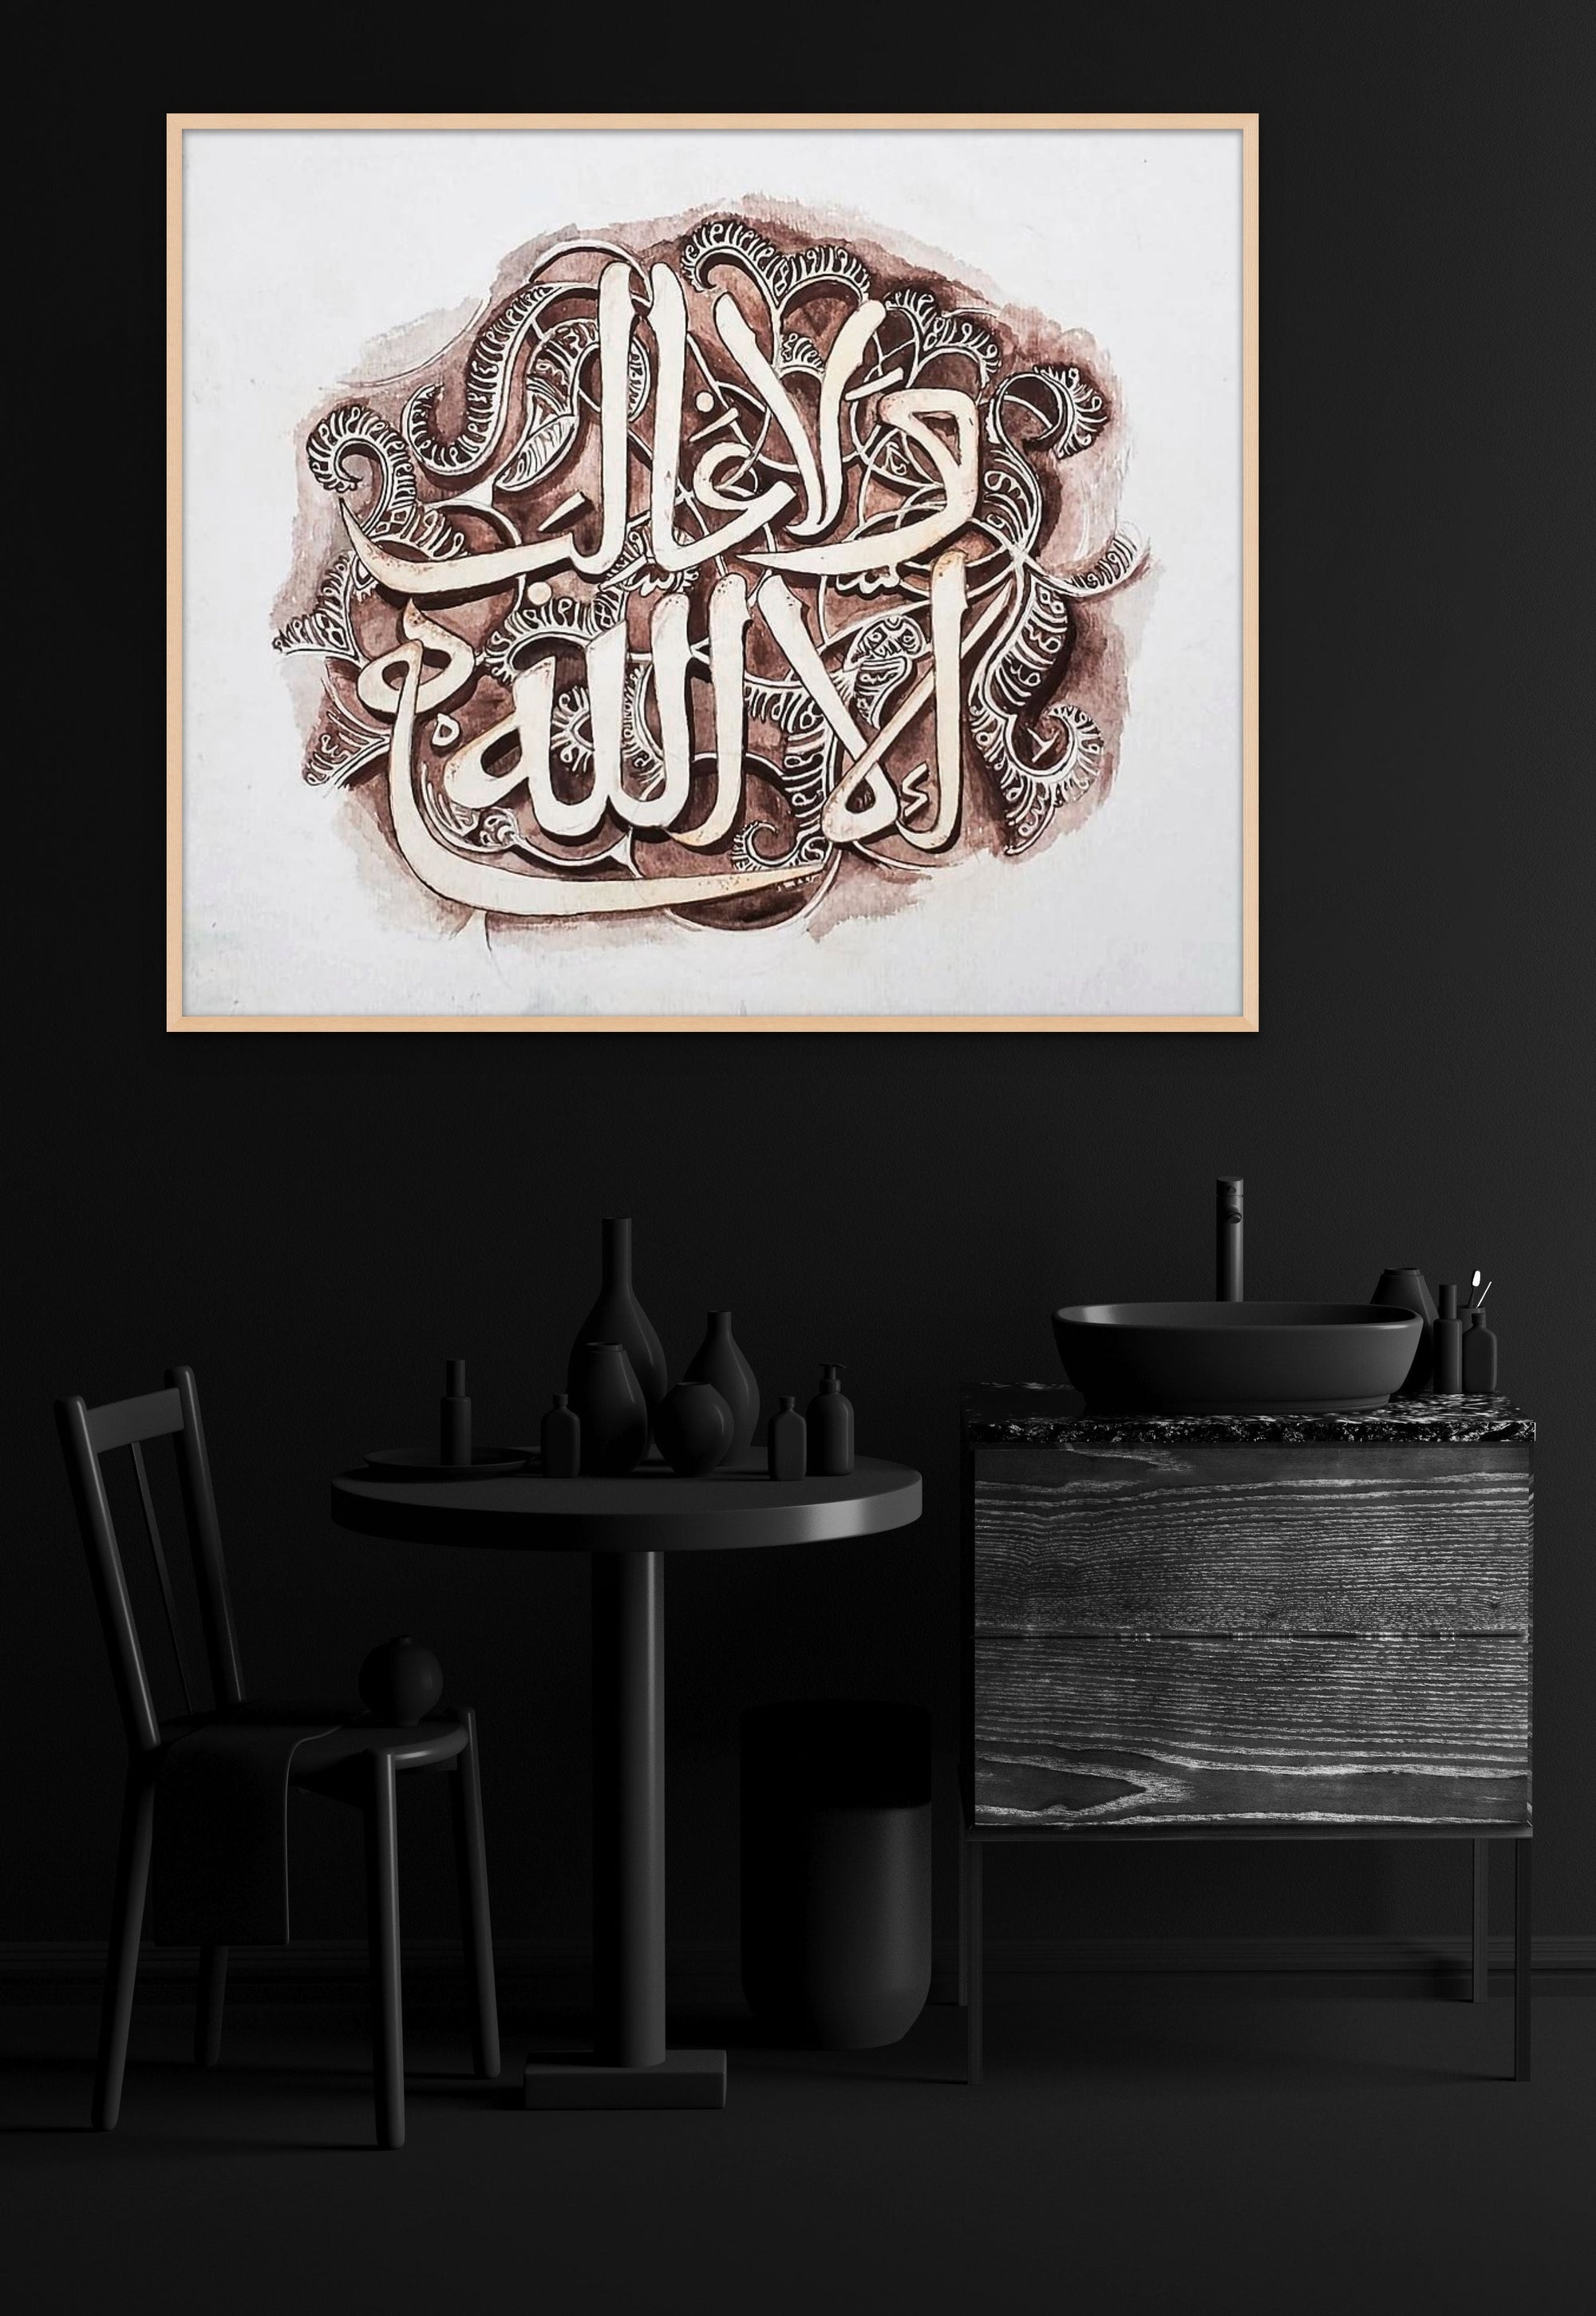 "There Is No Victor But Allah" - Islamic Art Ltd